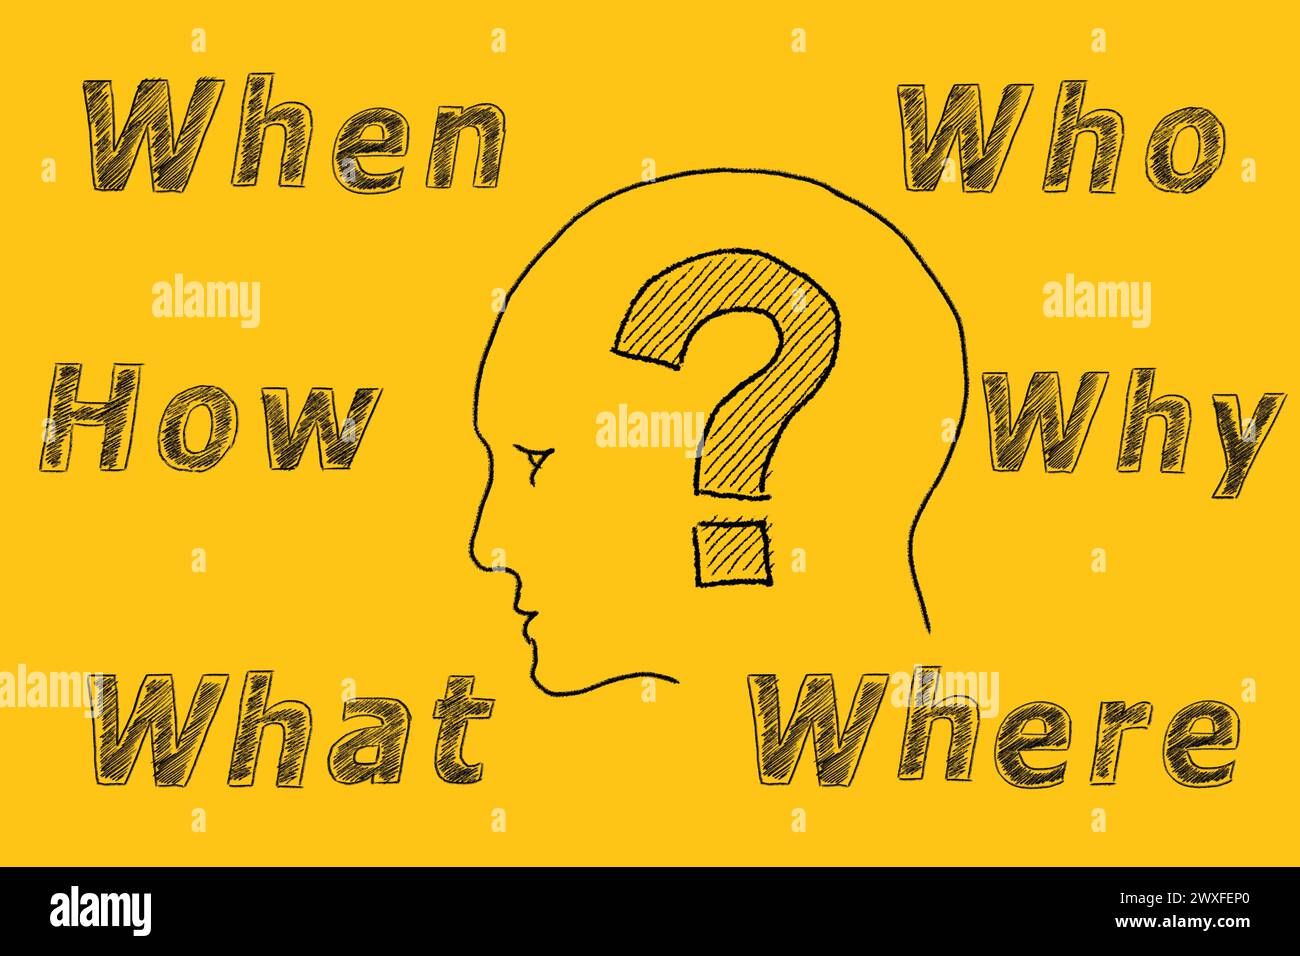 Human head with question mark and six most common questions Who, What, Where, When, Why, How. Asking questions. Having answers. Ask us, contact us, mo Stock Photo